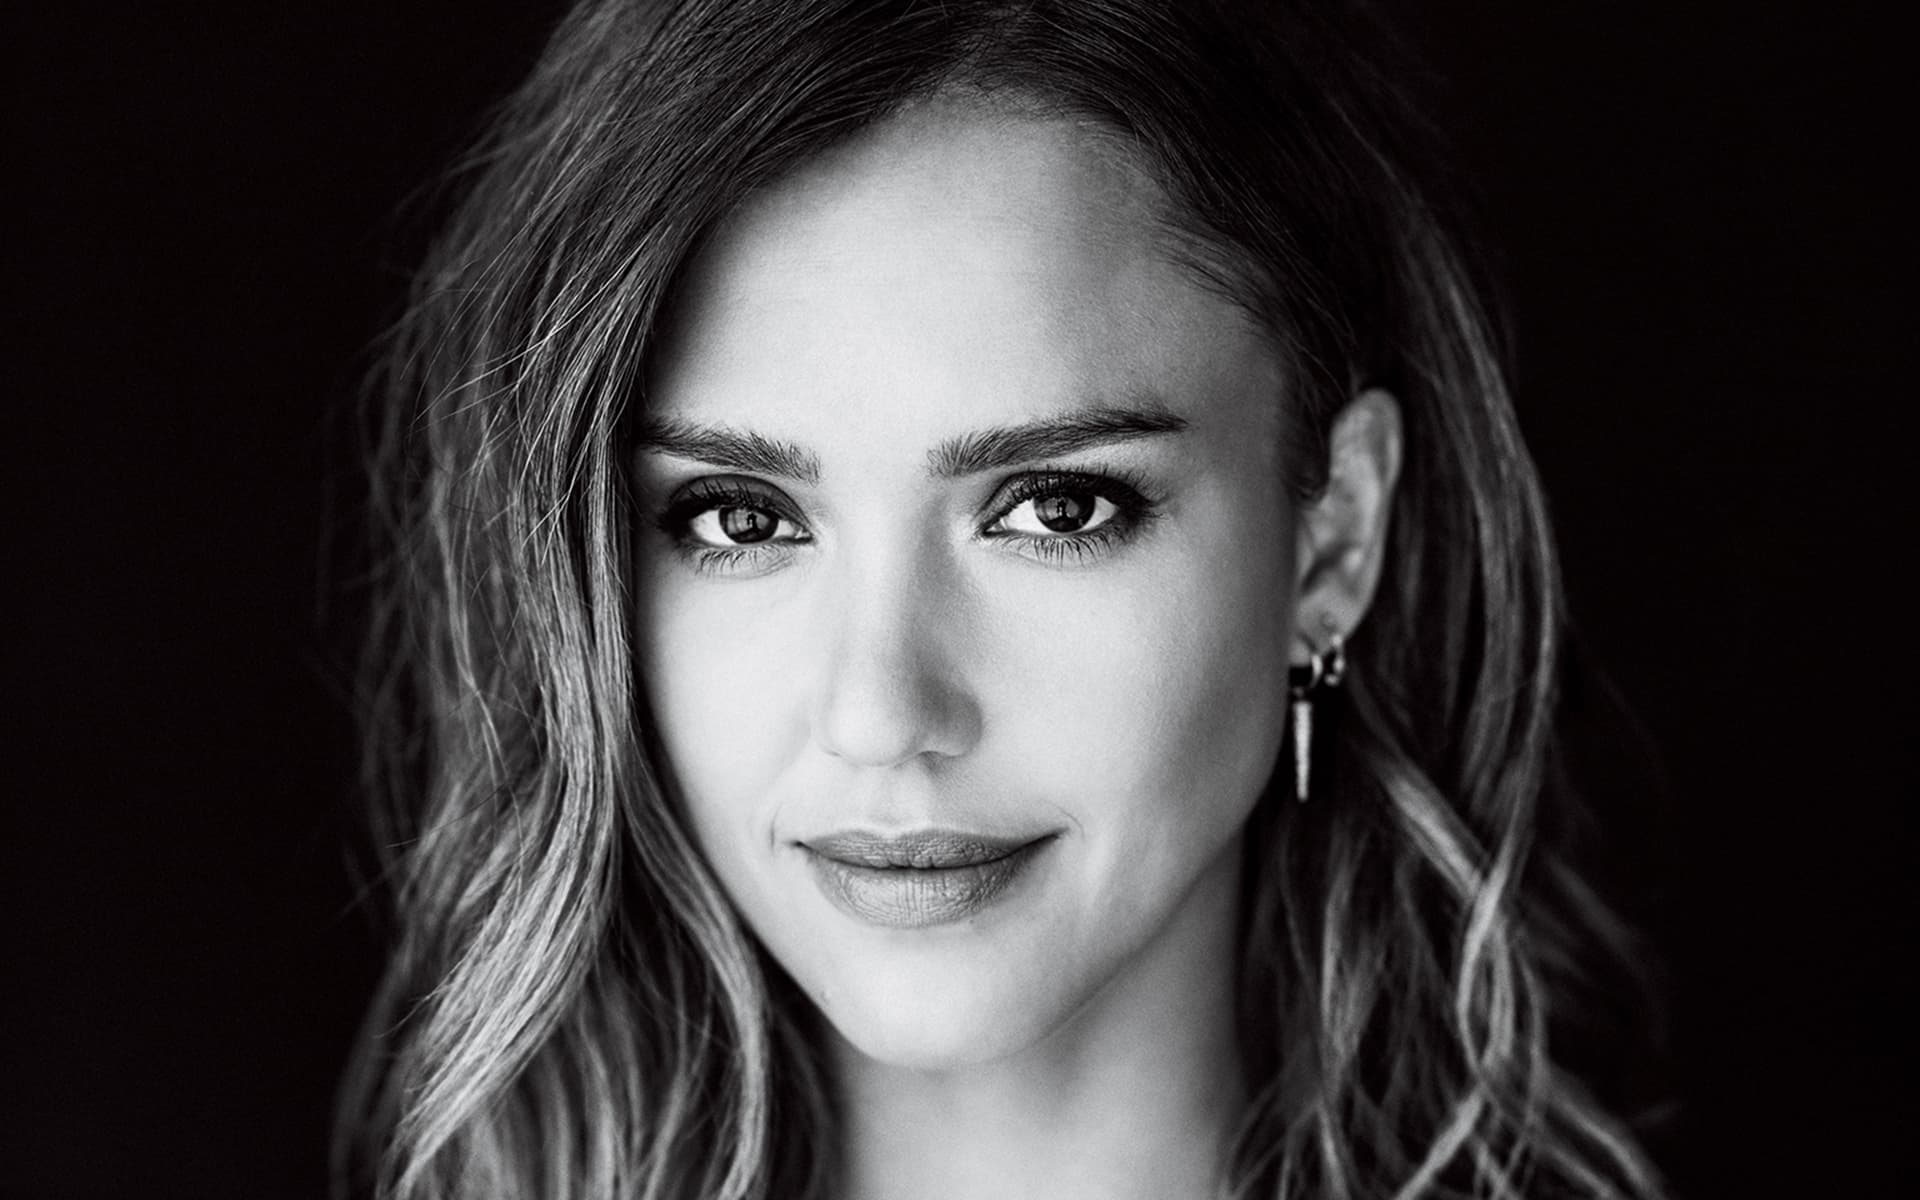 Gallery For Gt Jessica Alba Black And White